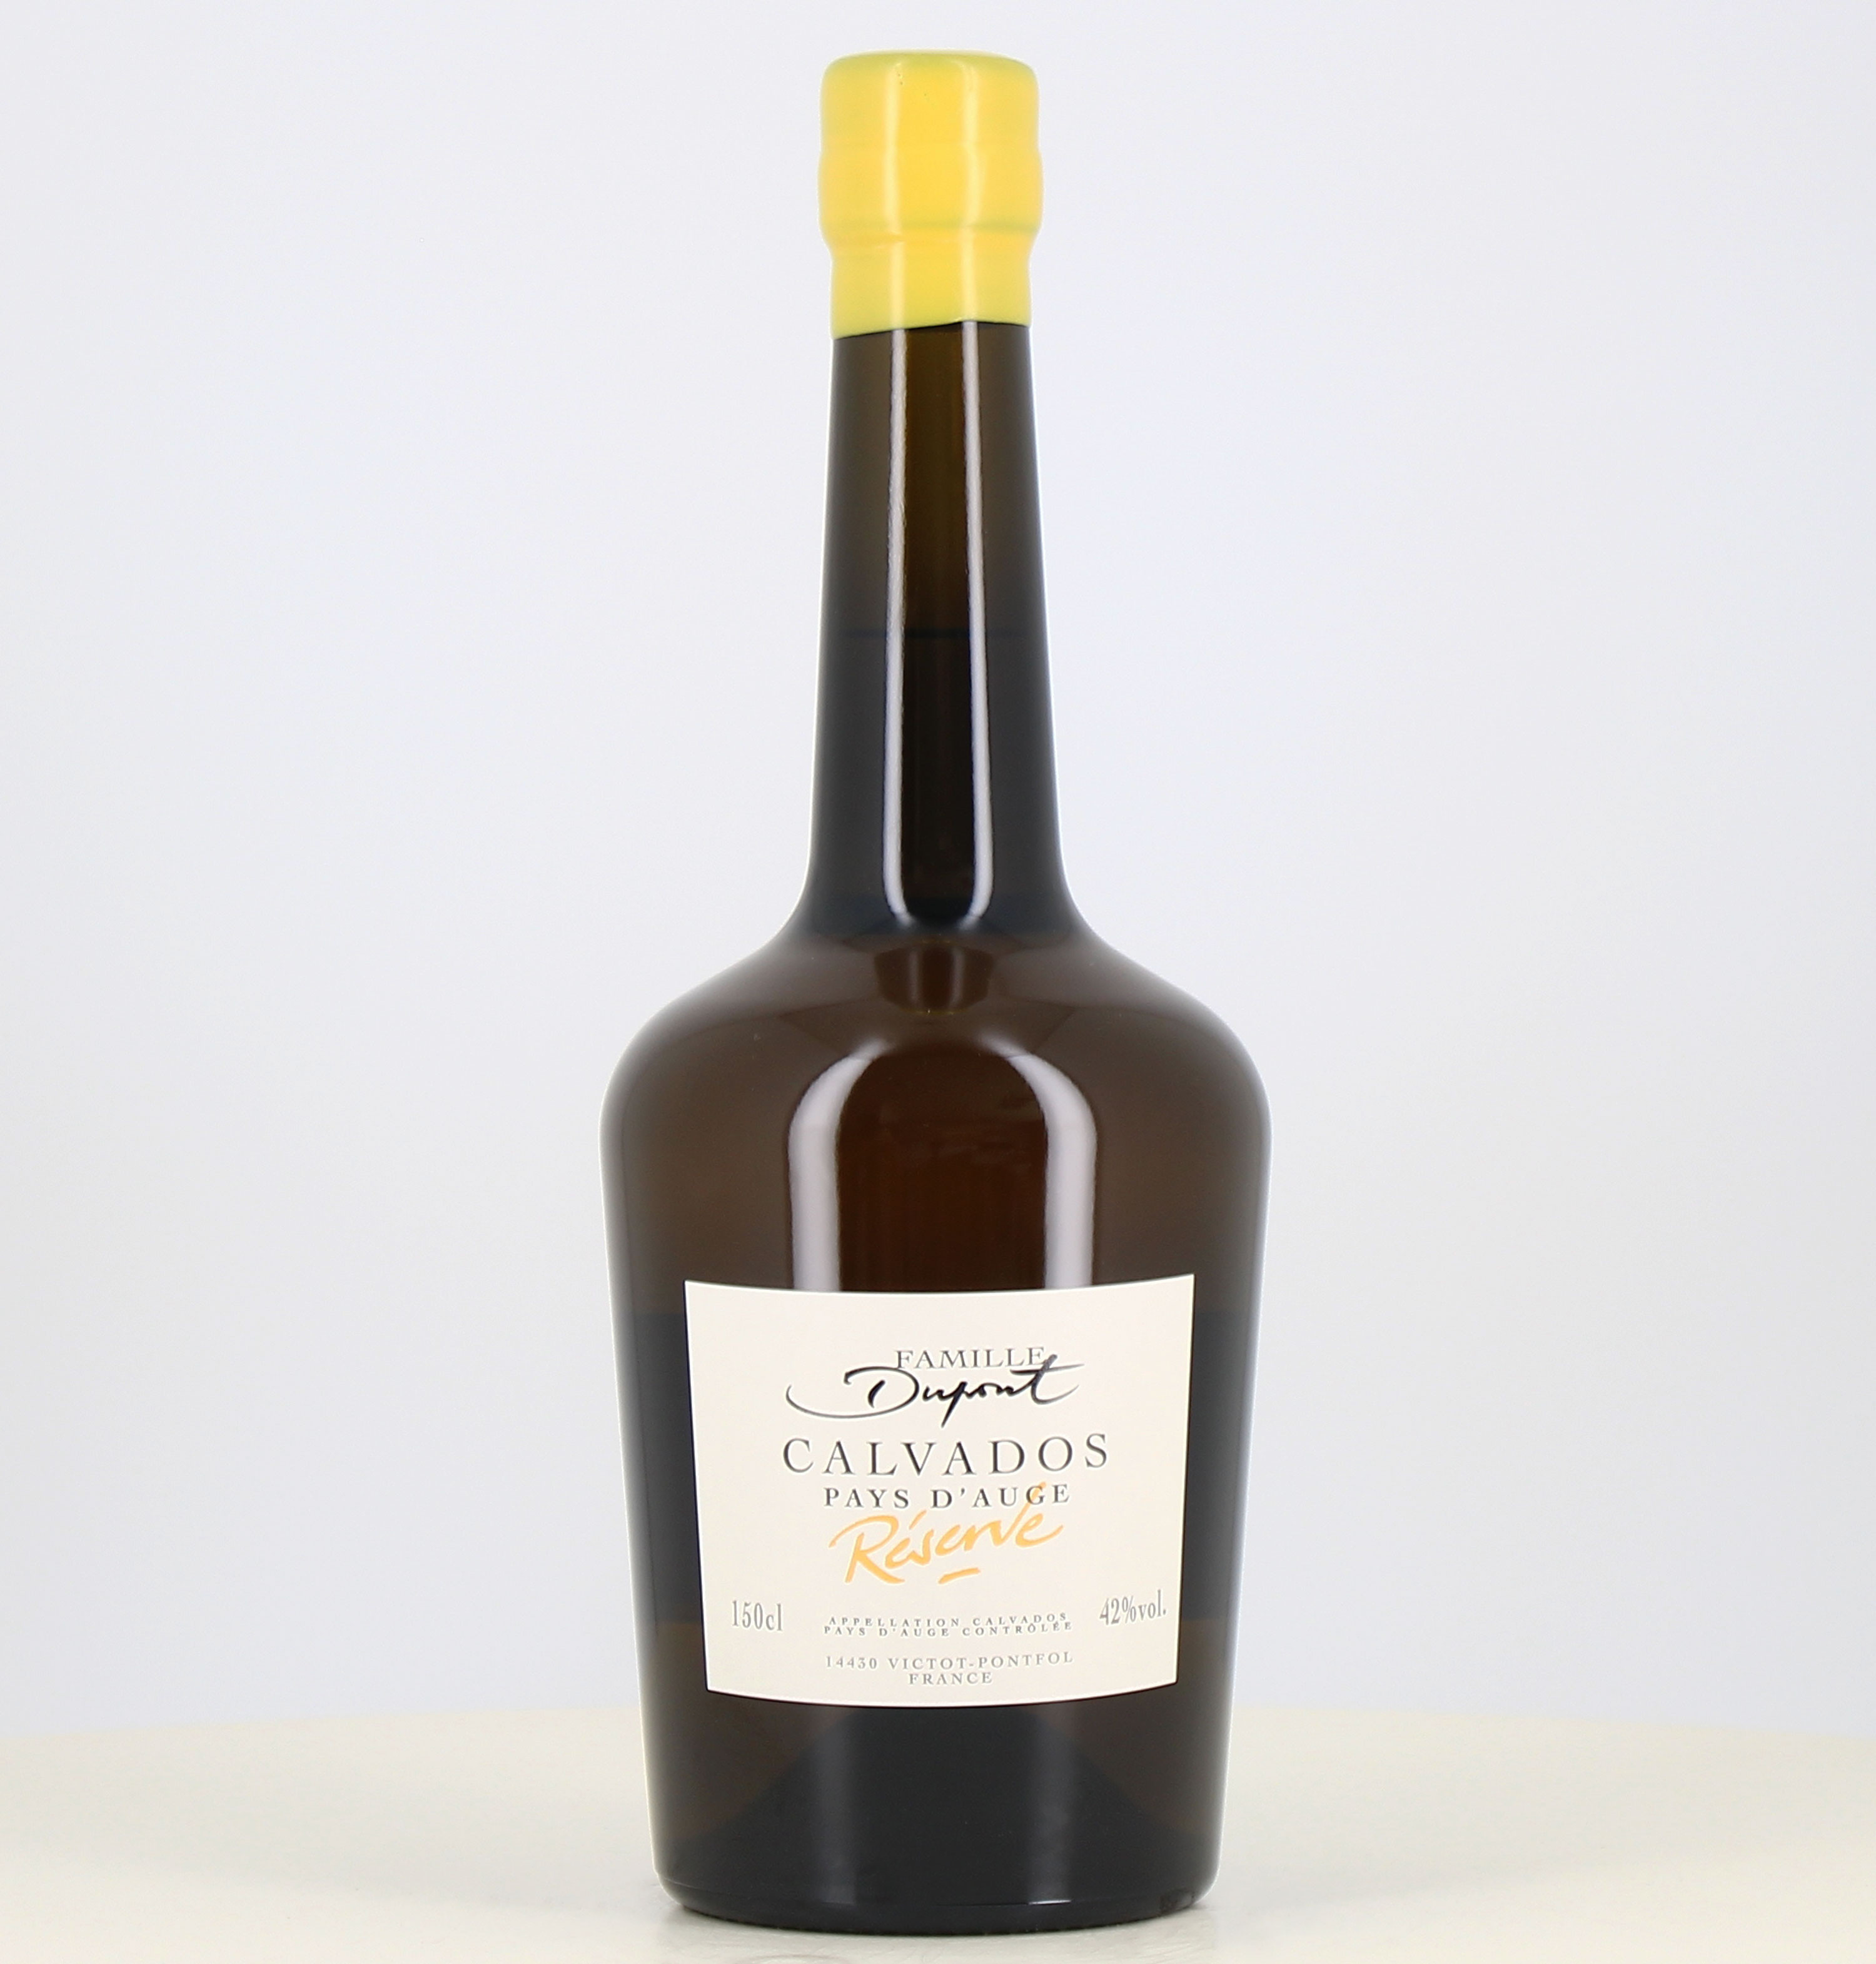 Magnum calvados from Pays d'Auge Dupont reserve 42° 